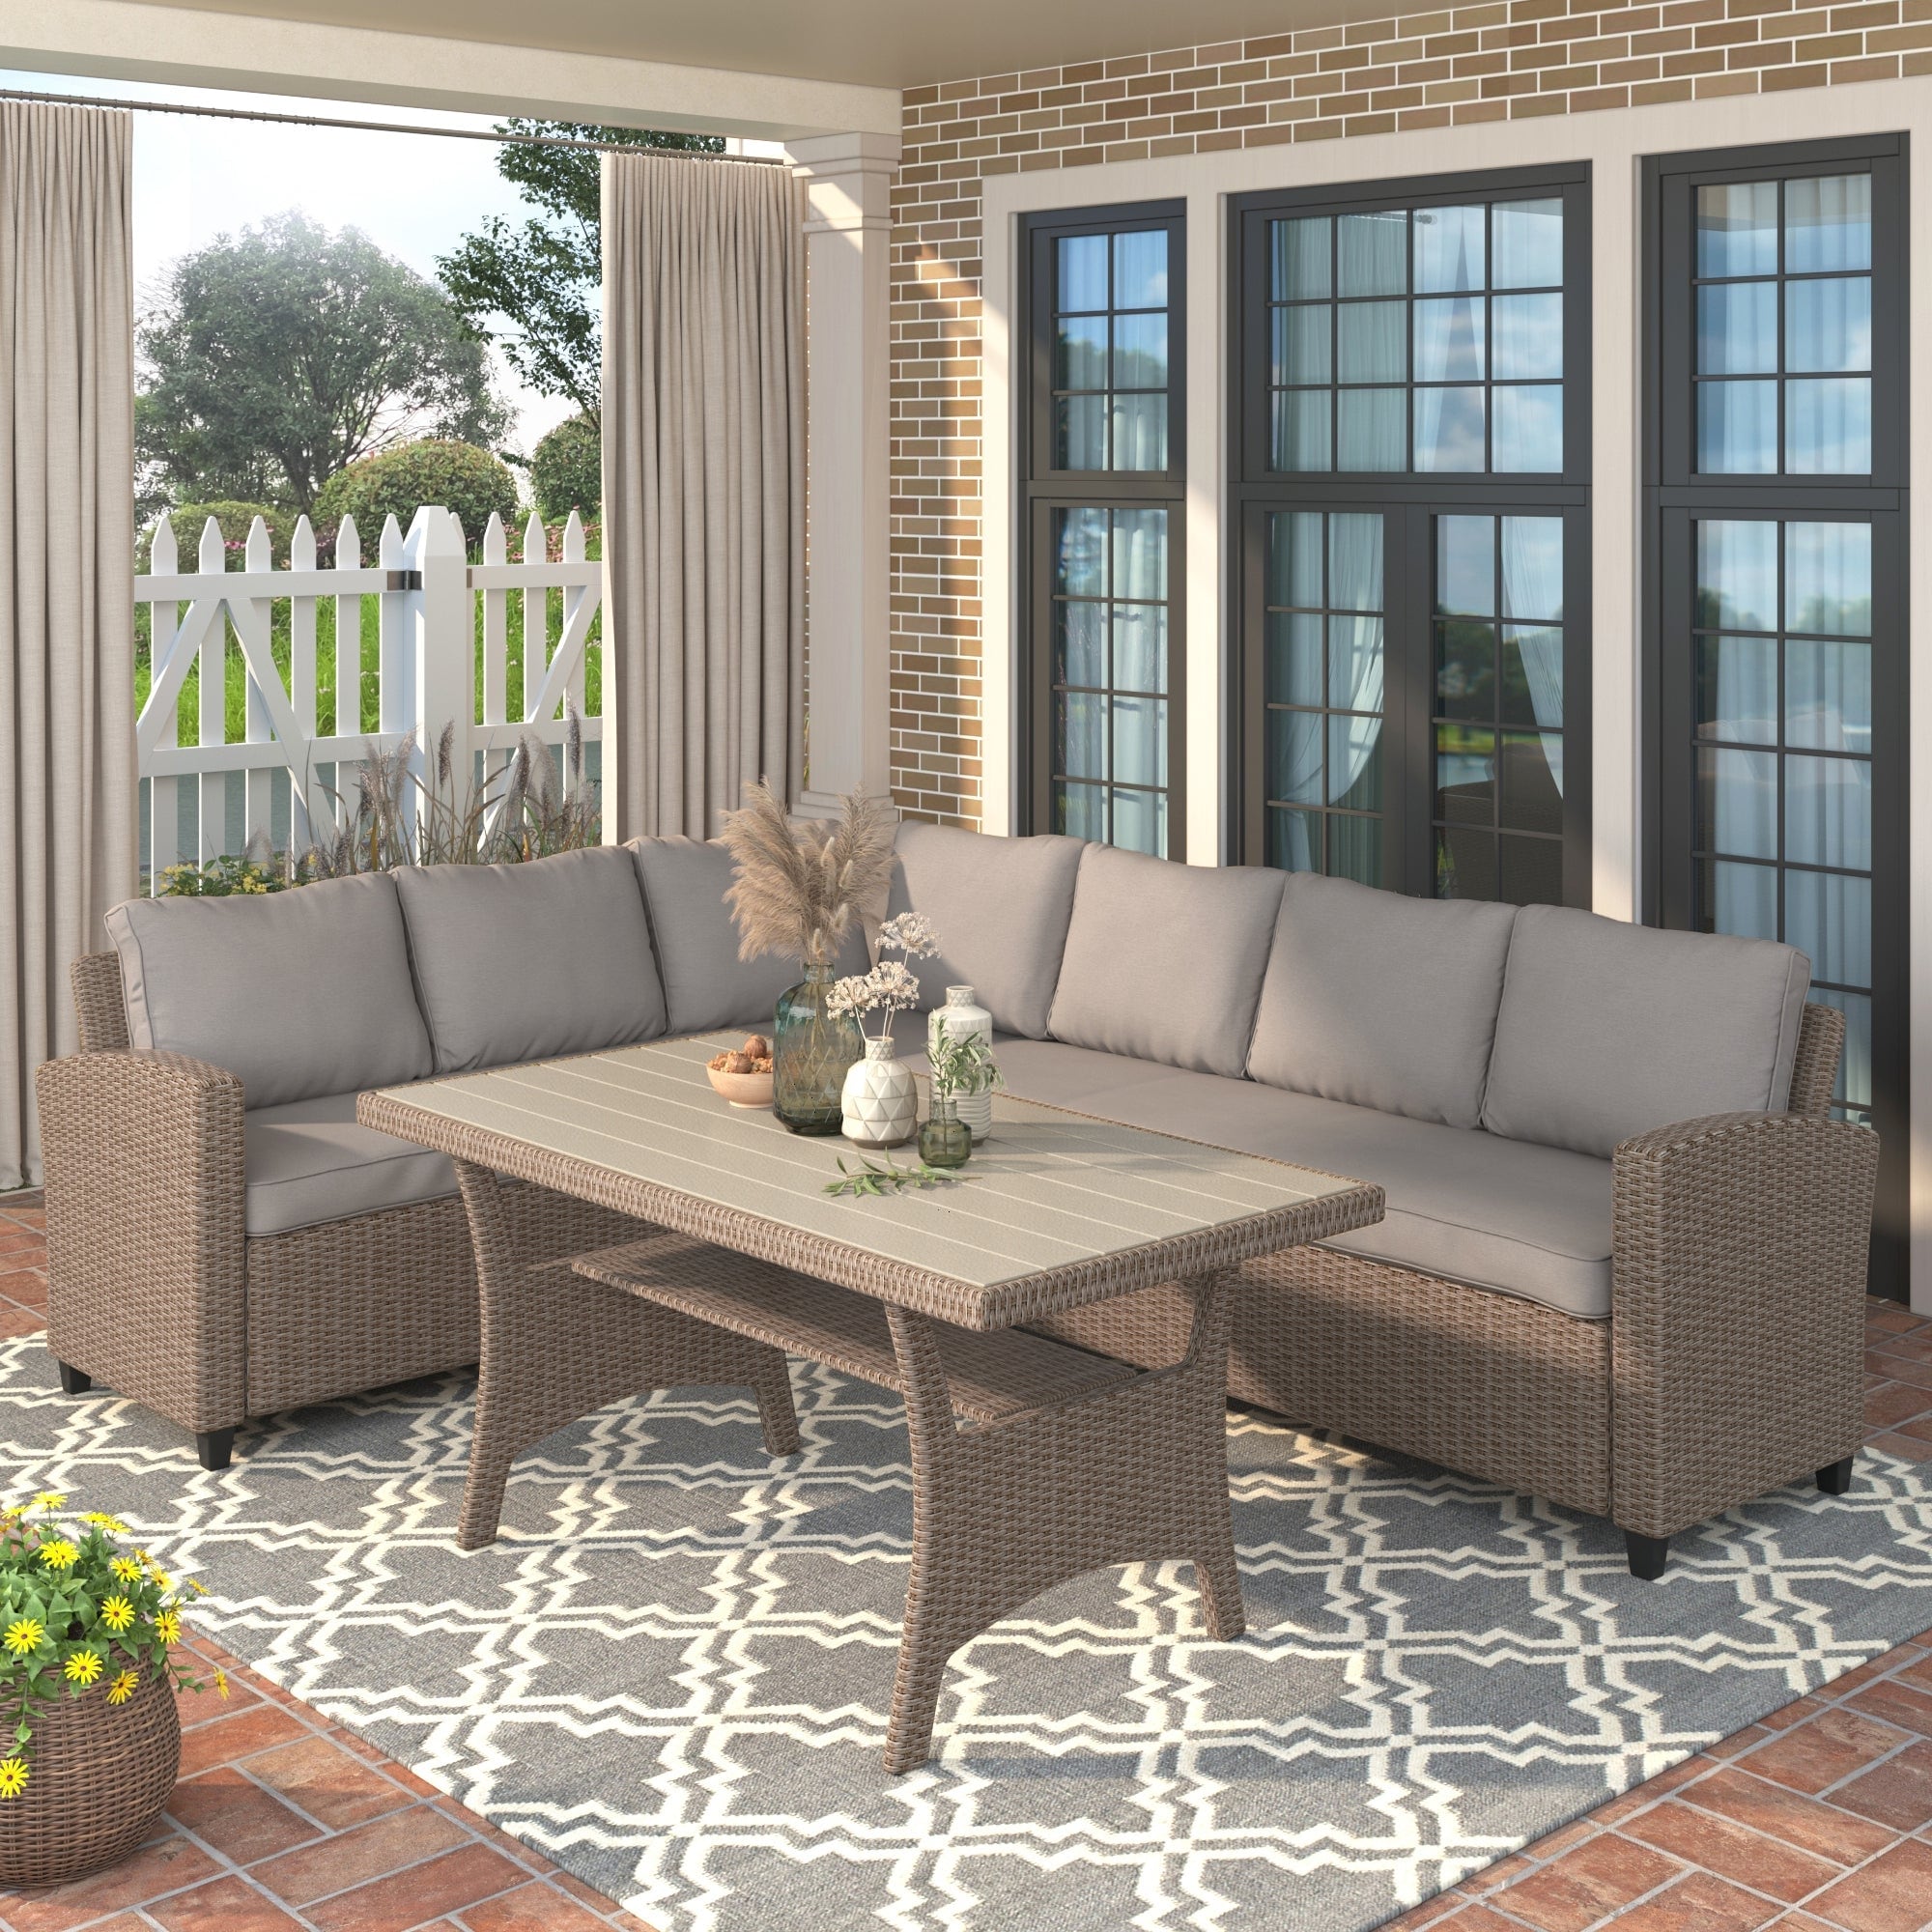 3 Pieces Outdoor Rattan Patio Sectional Sofa Set With Cushions And Table